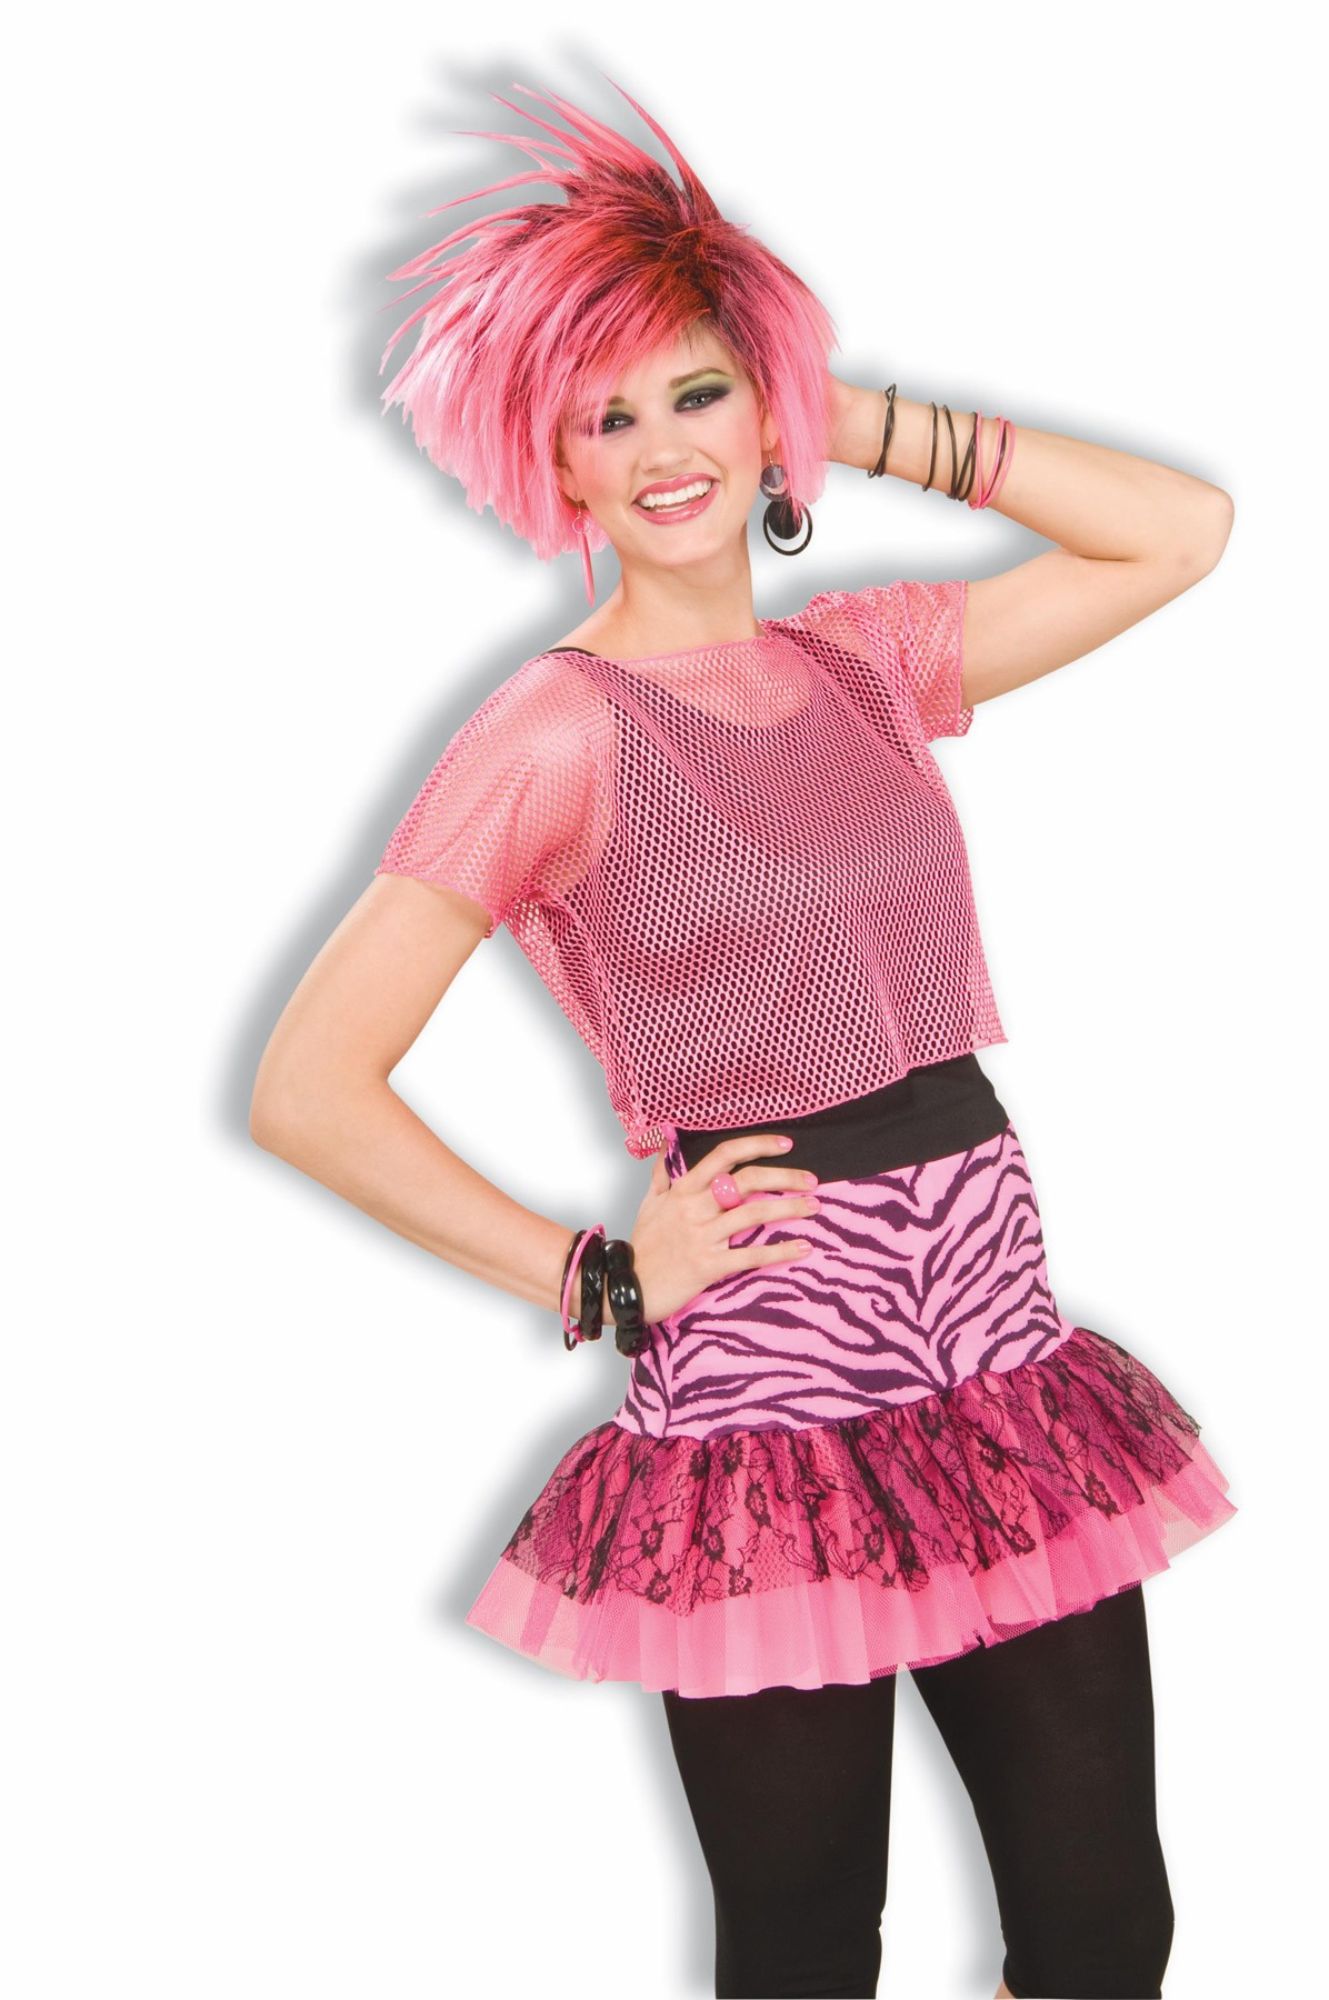 The Costume Center Pink and Black Pop Party Skirt Women Adult Halloween Costume - One Size